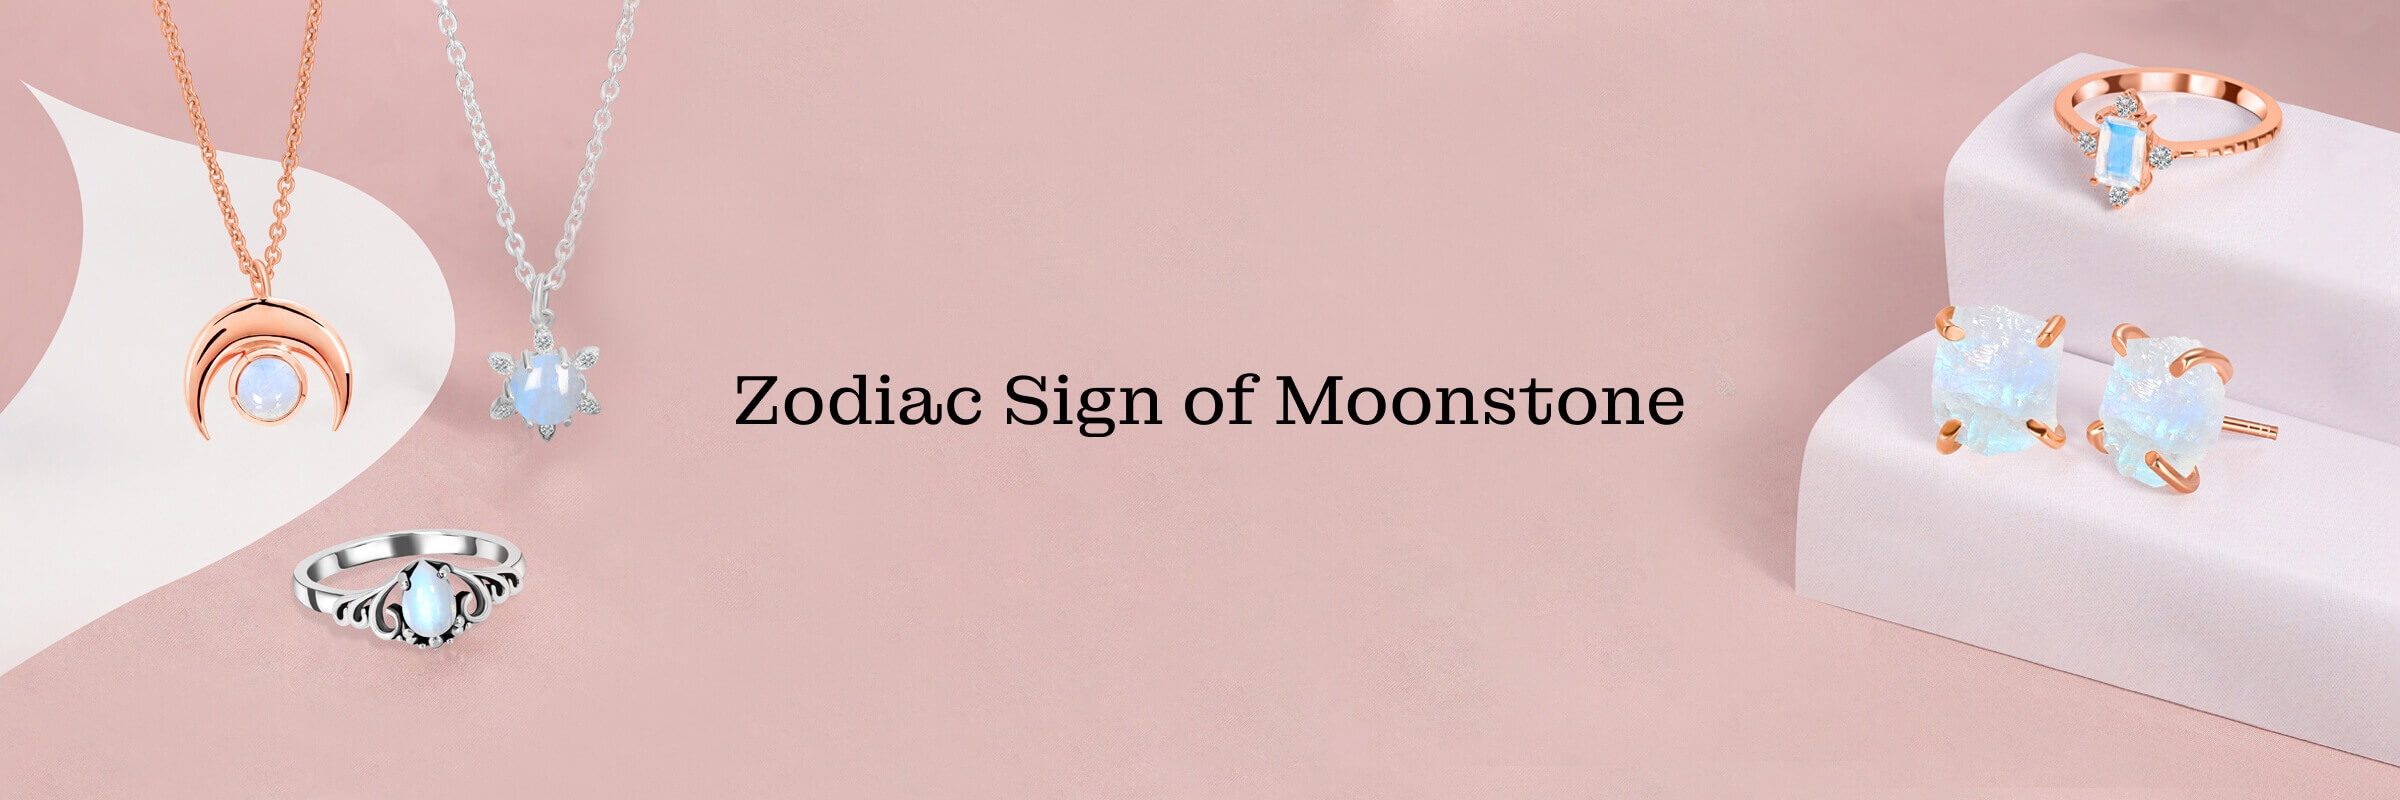 Zodiac Sign Associated to Moonstone